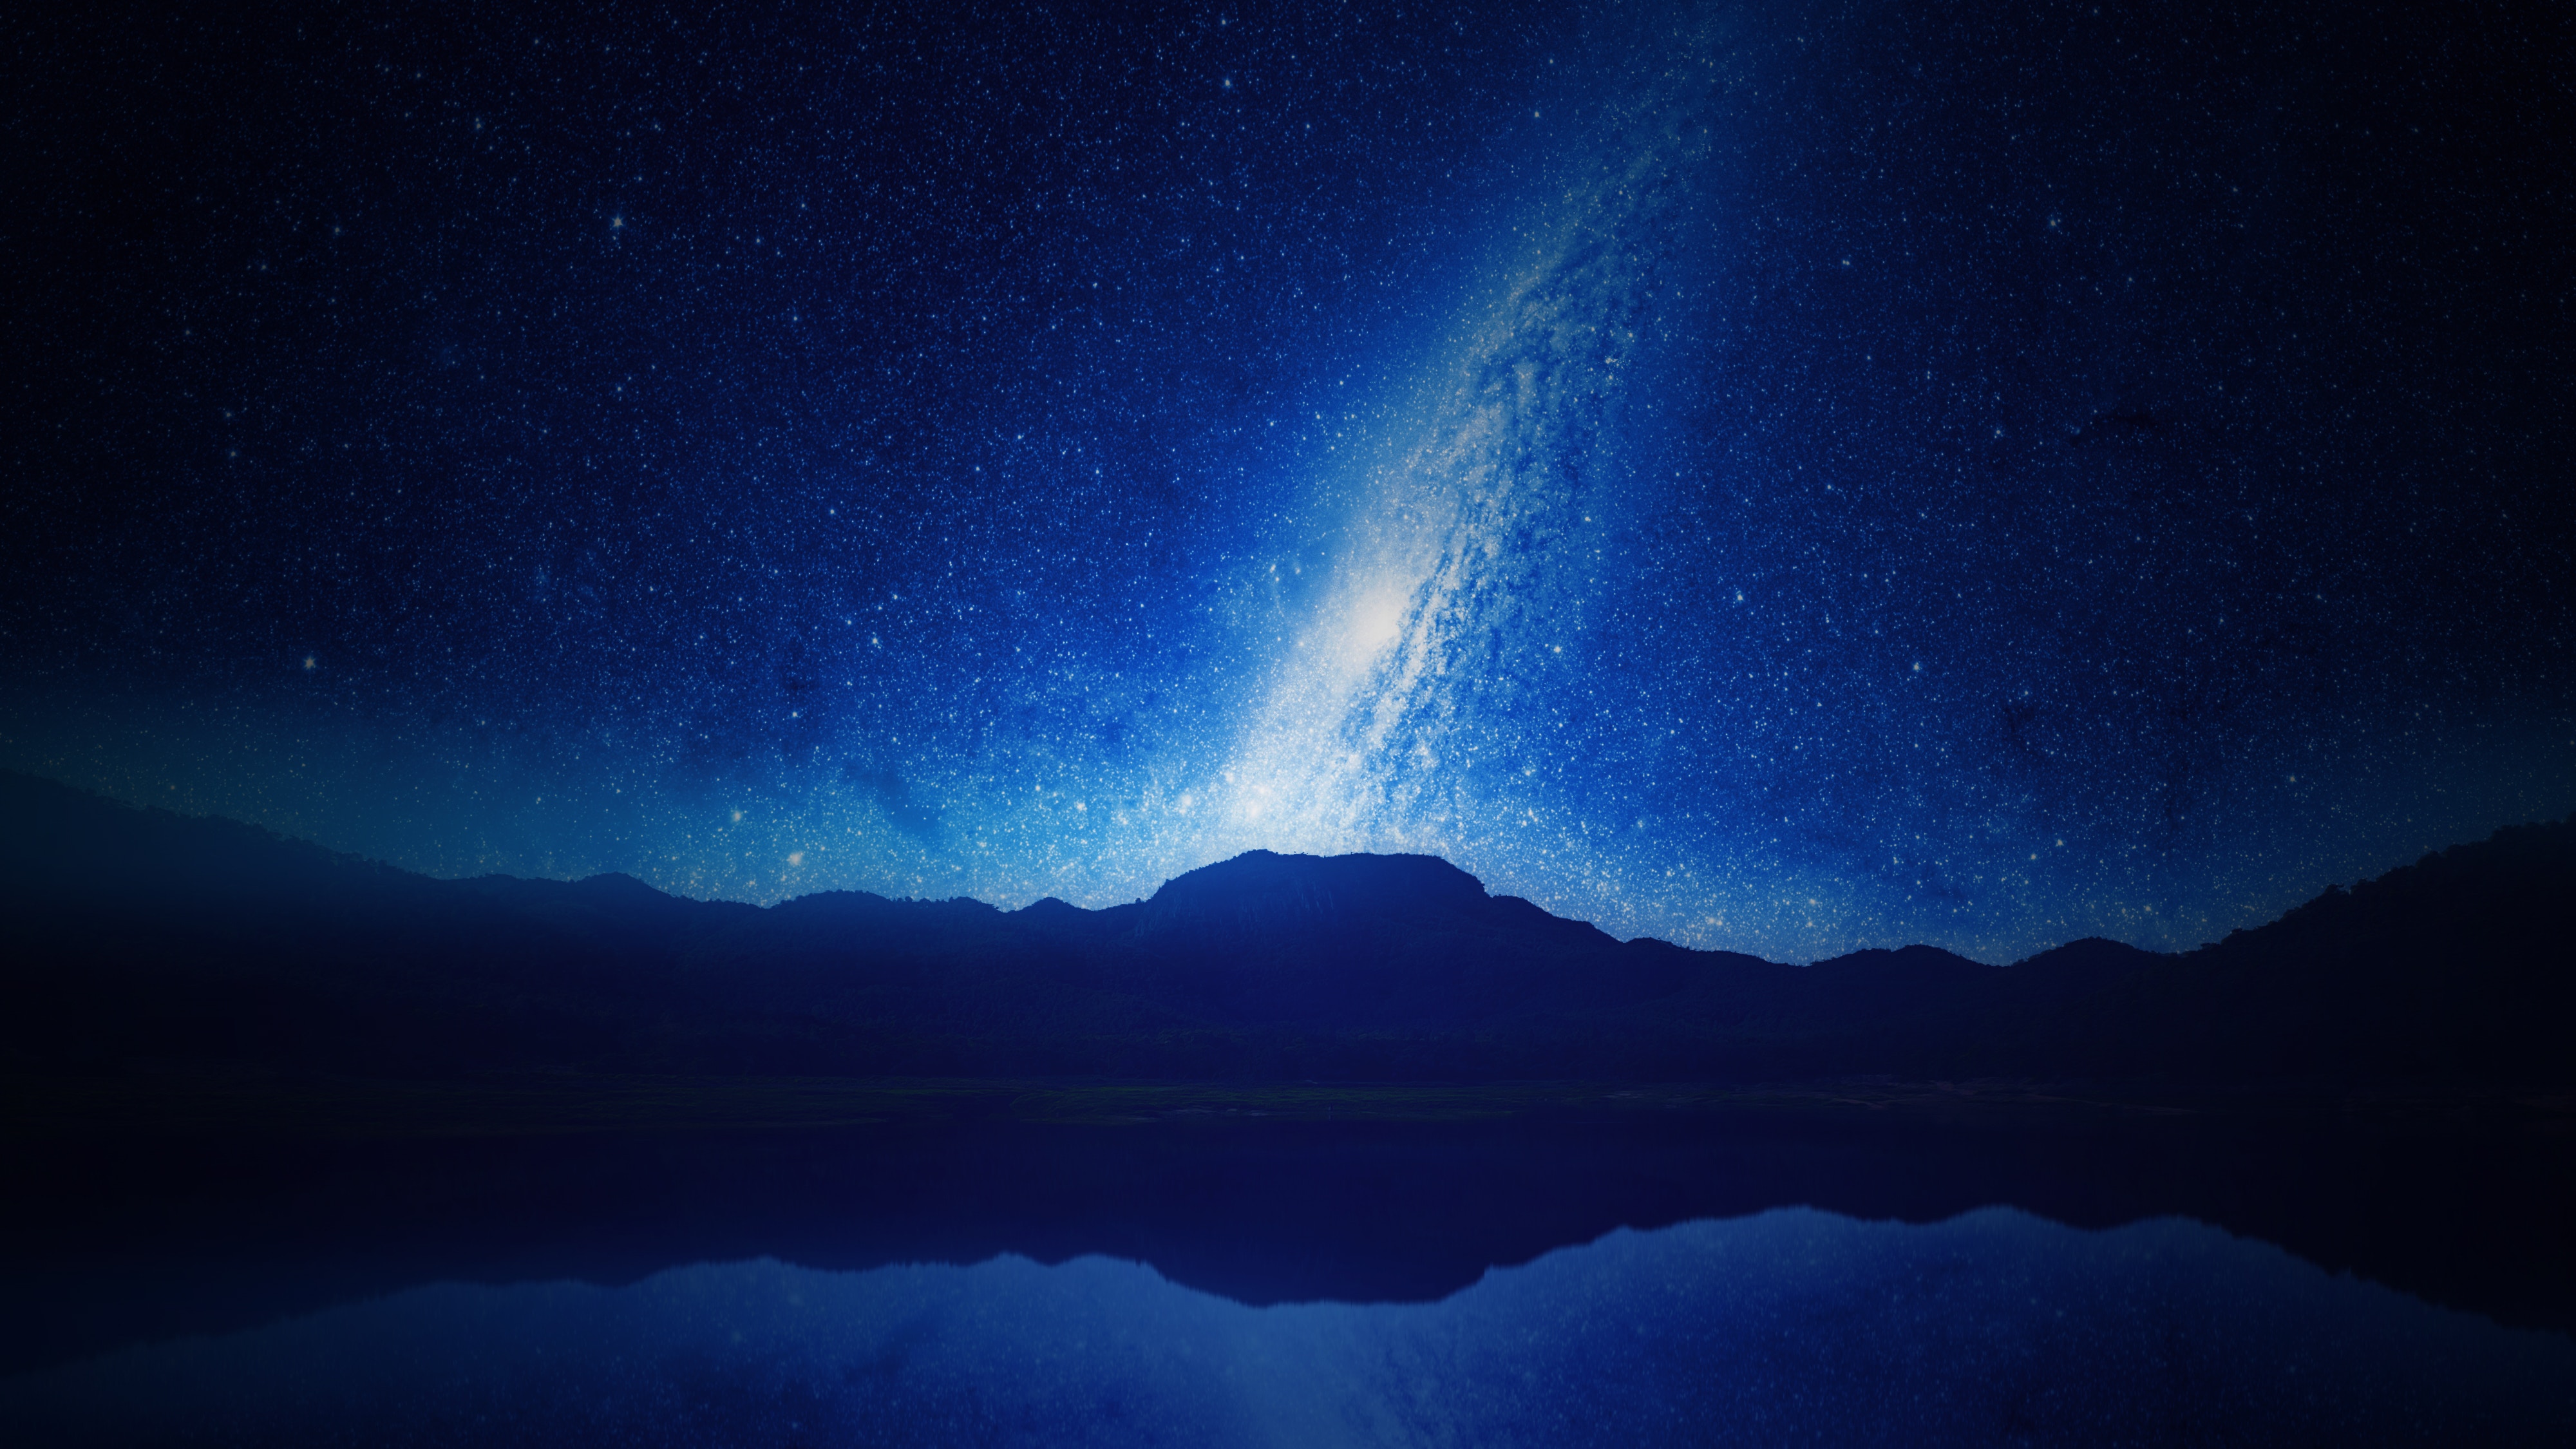 New Lock Screen Wallpapers milky way, starry sky, universe, mountains, night